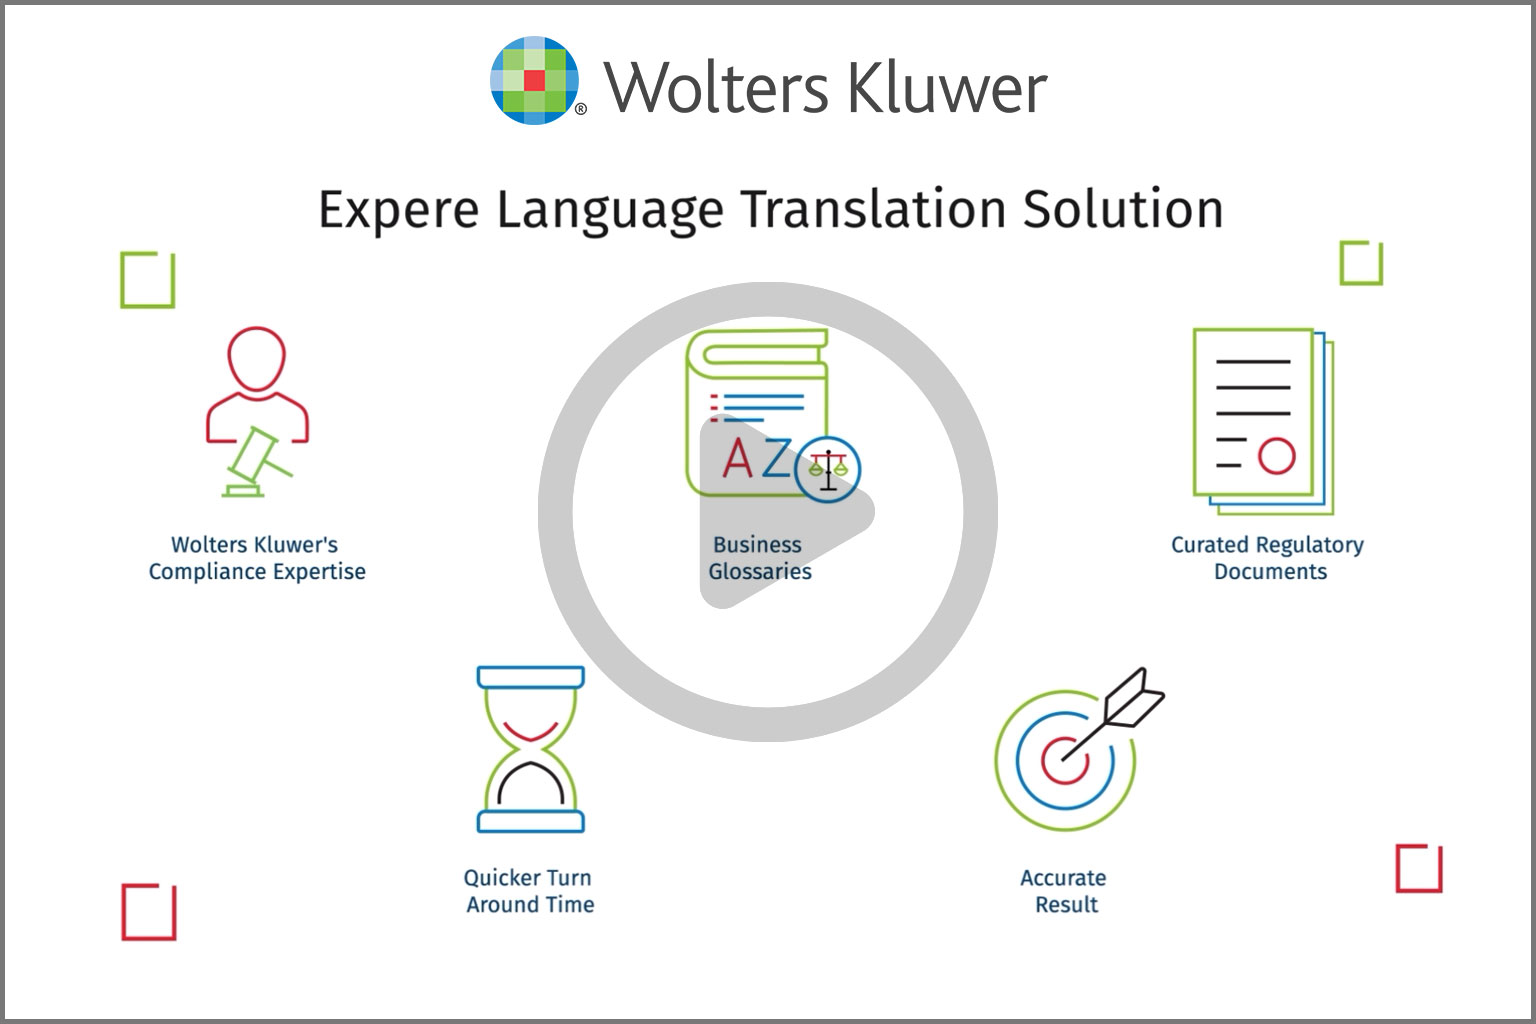 Wolters Kluwer Expere Language Translation Solution